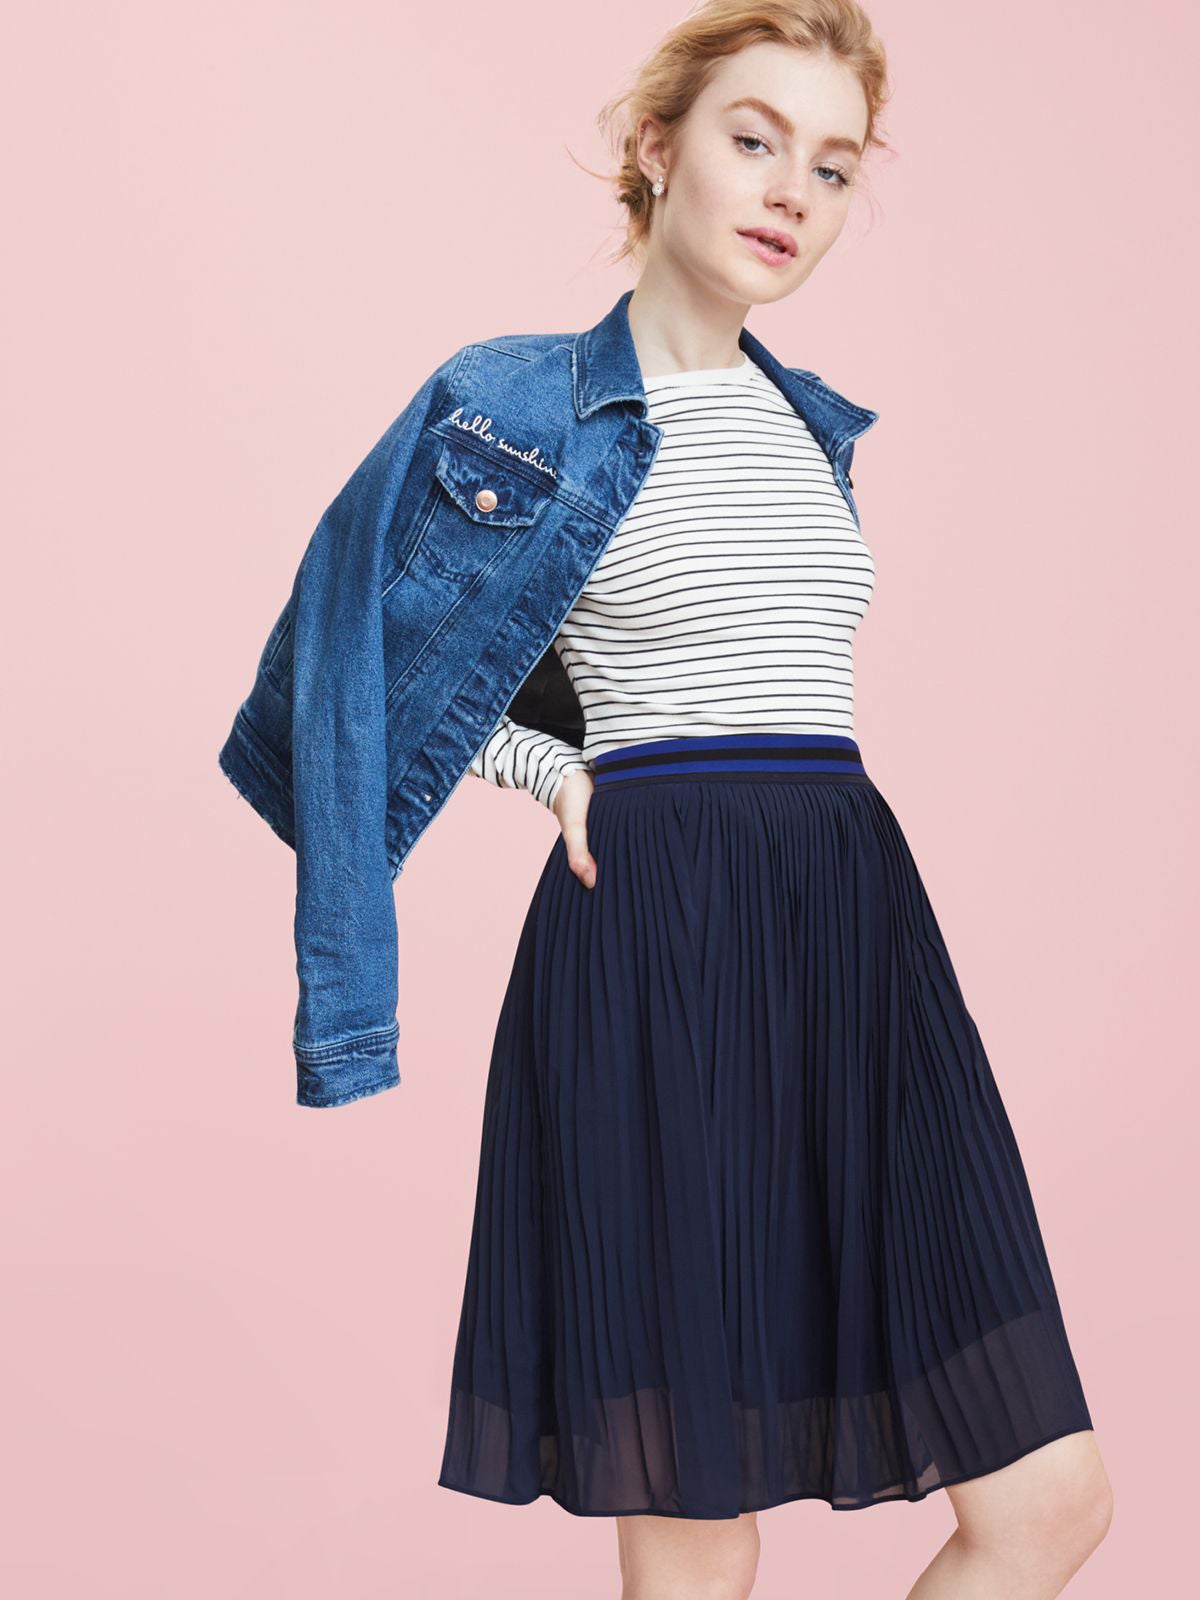 Target Debuts A New In-House Women's Fashion Line And It's Really Cute
